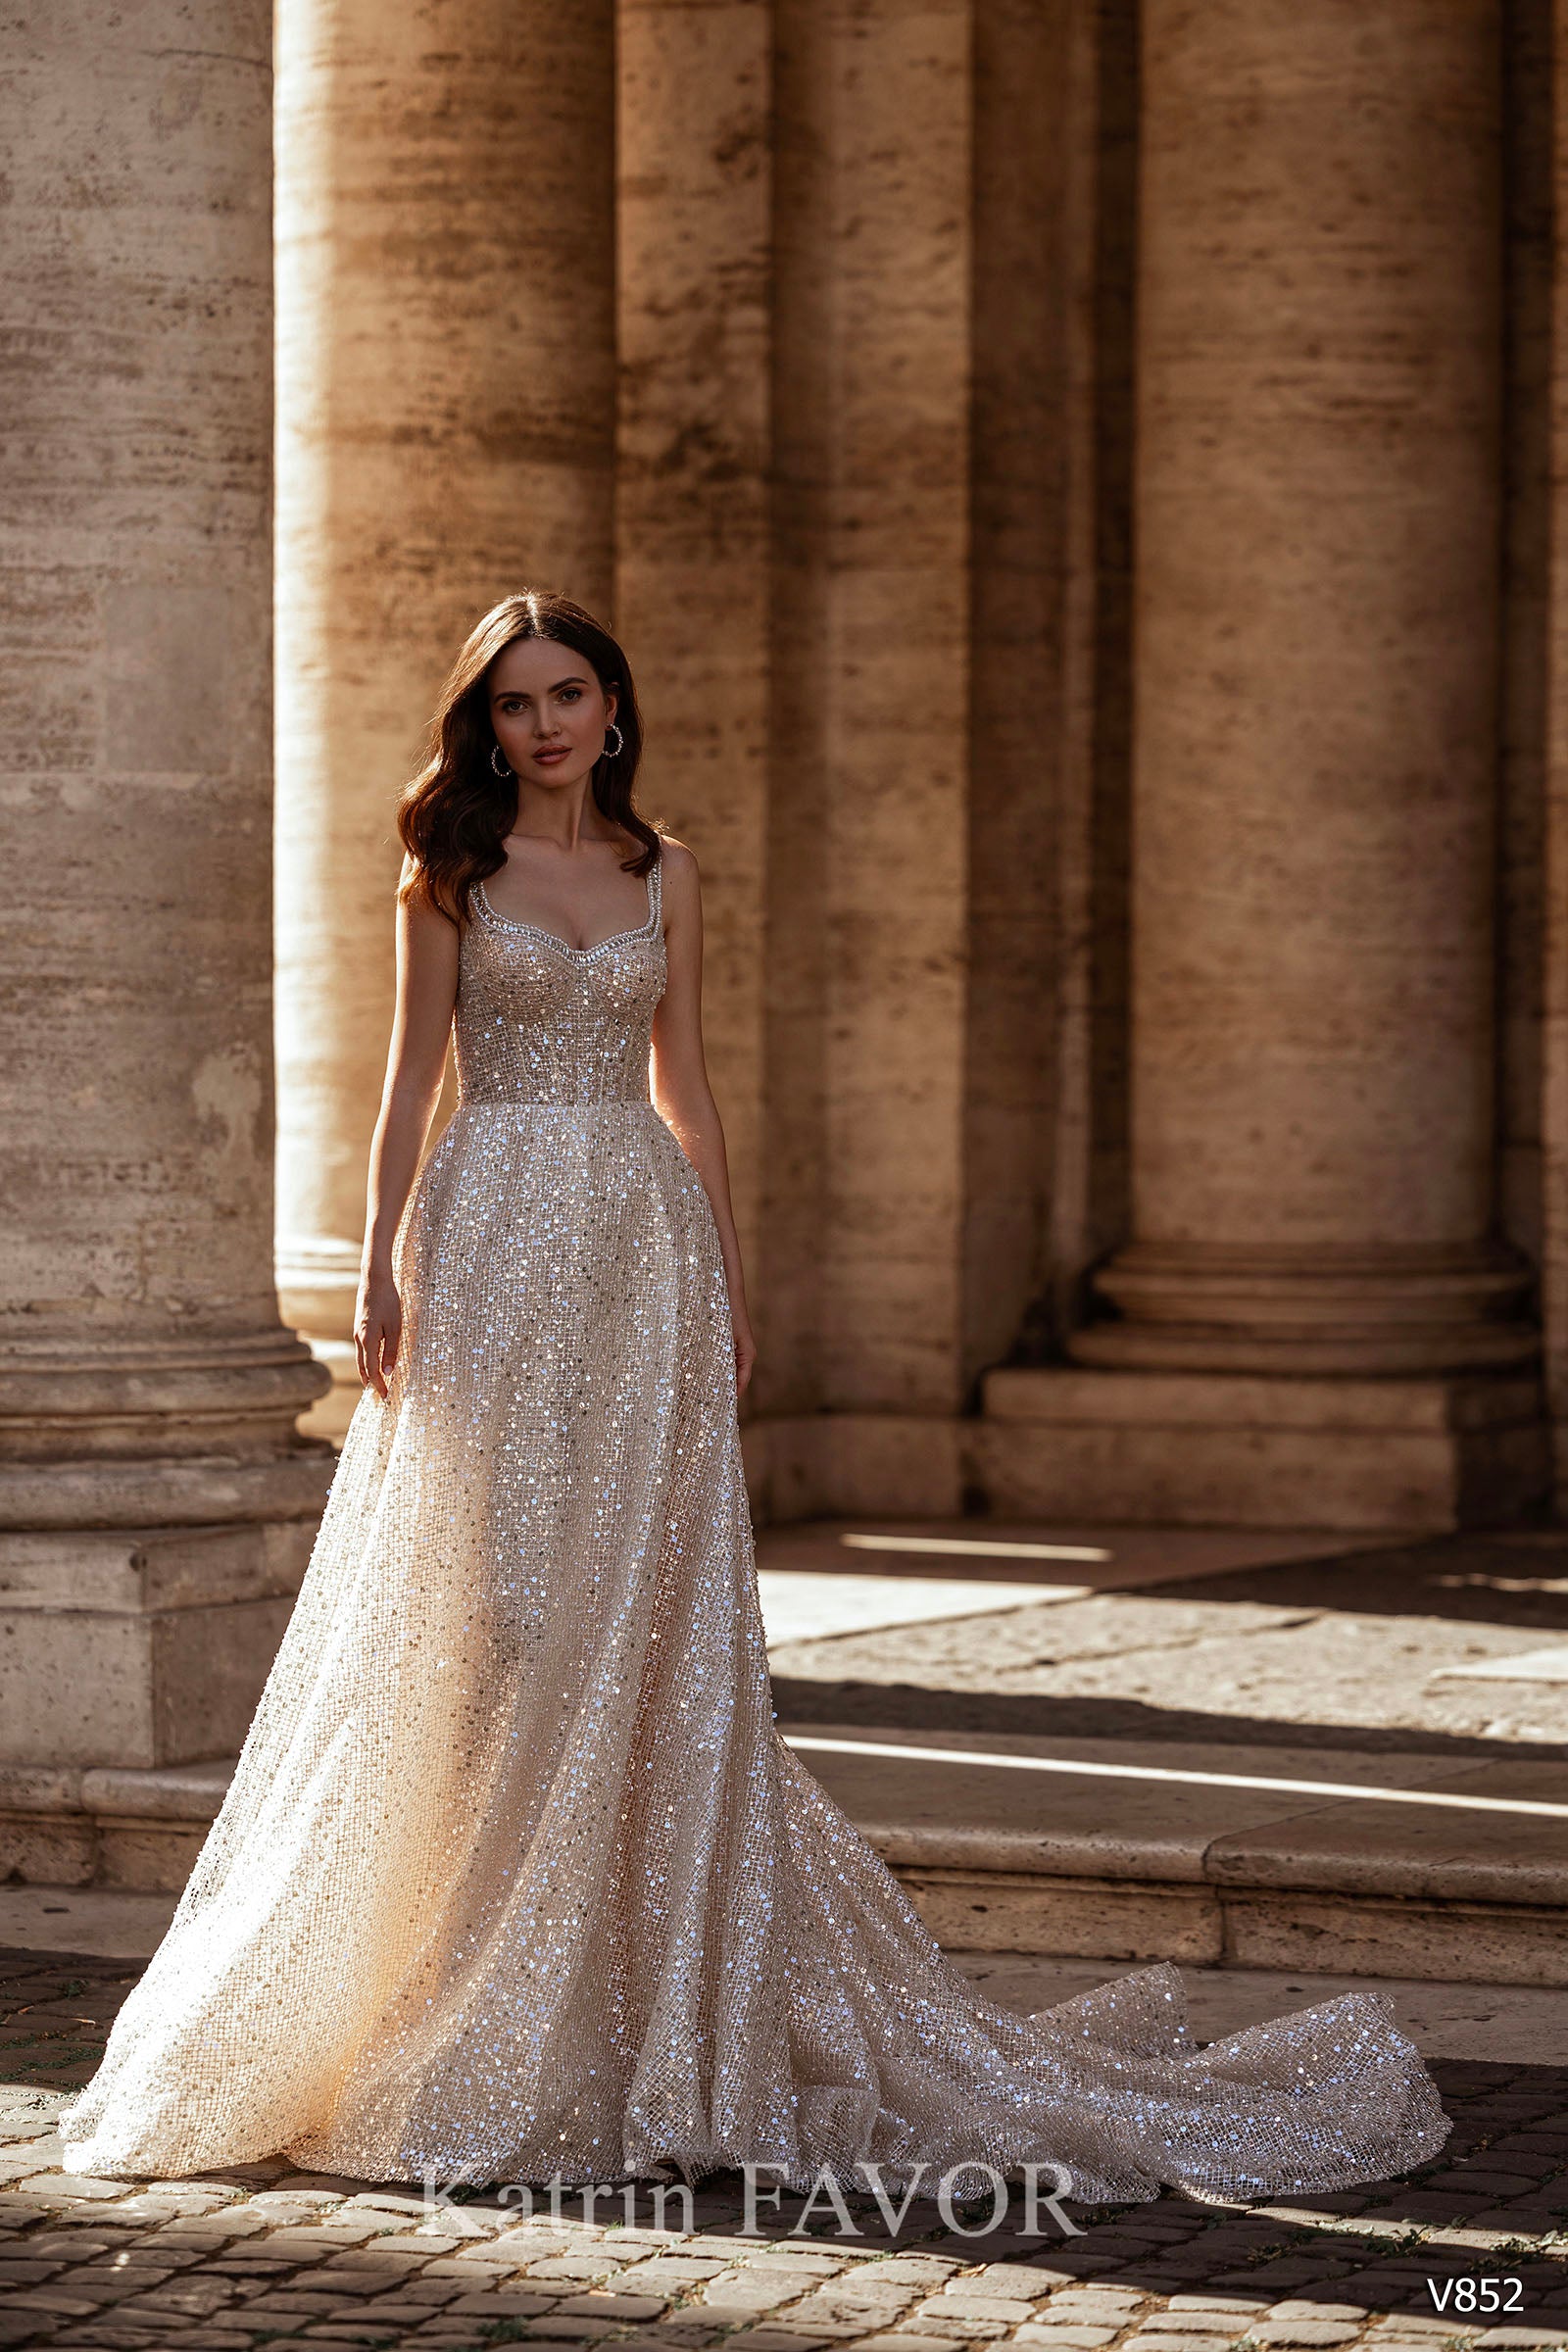 KatrinFAVORboutique-Sparkly champagne wedding dress with train